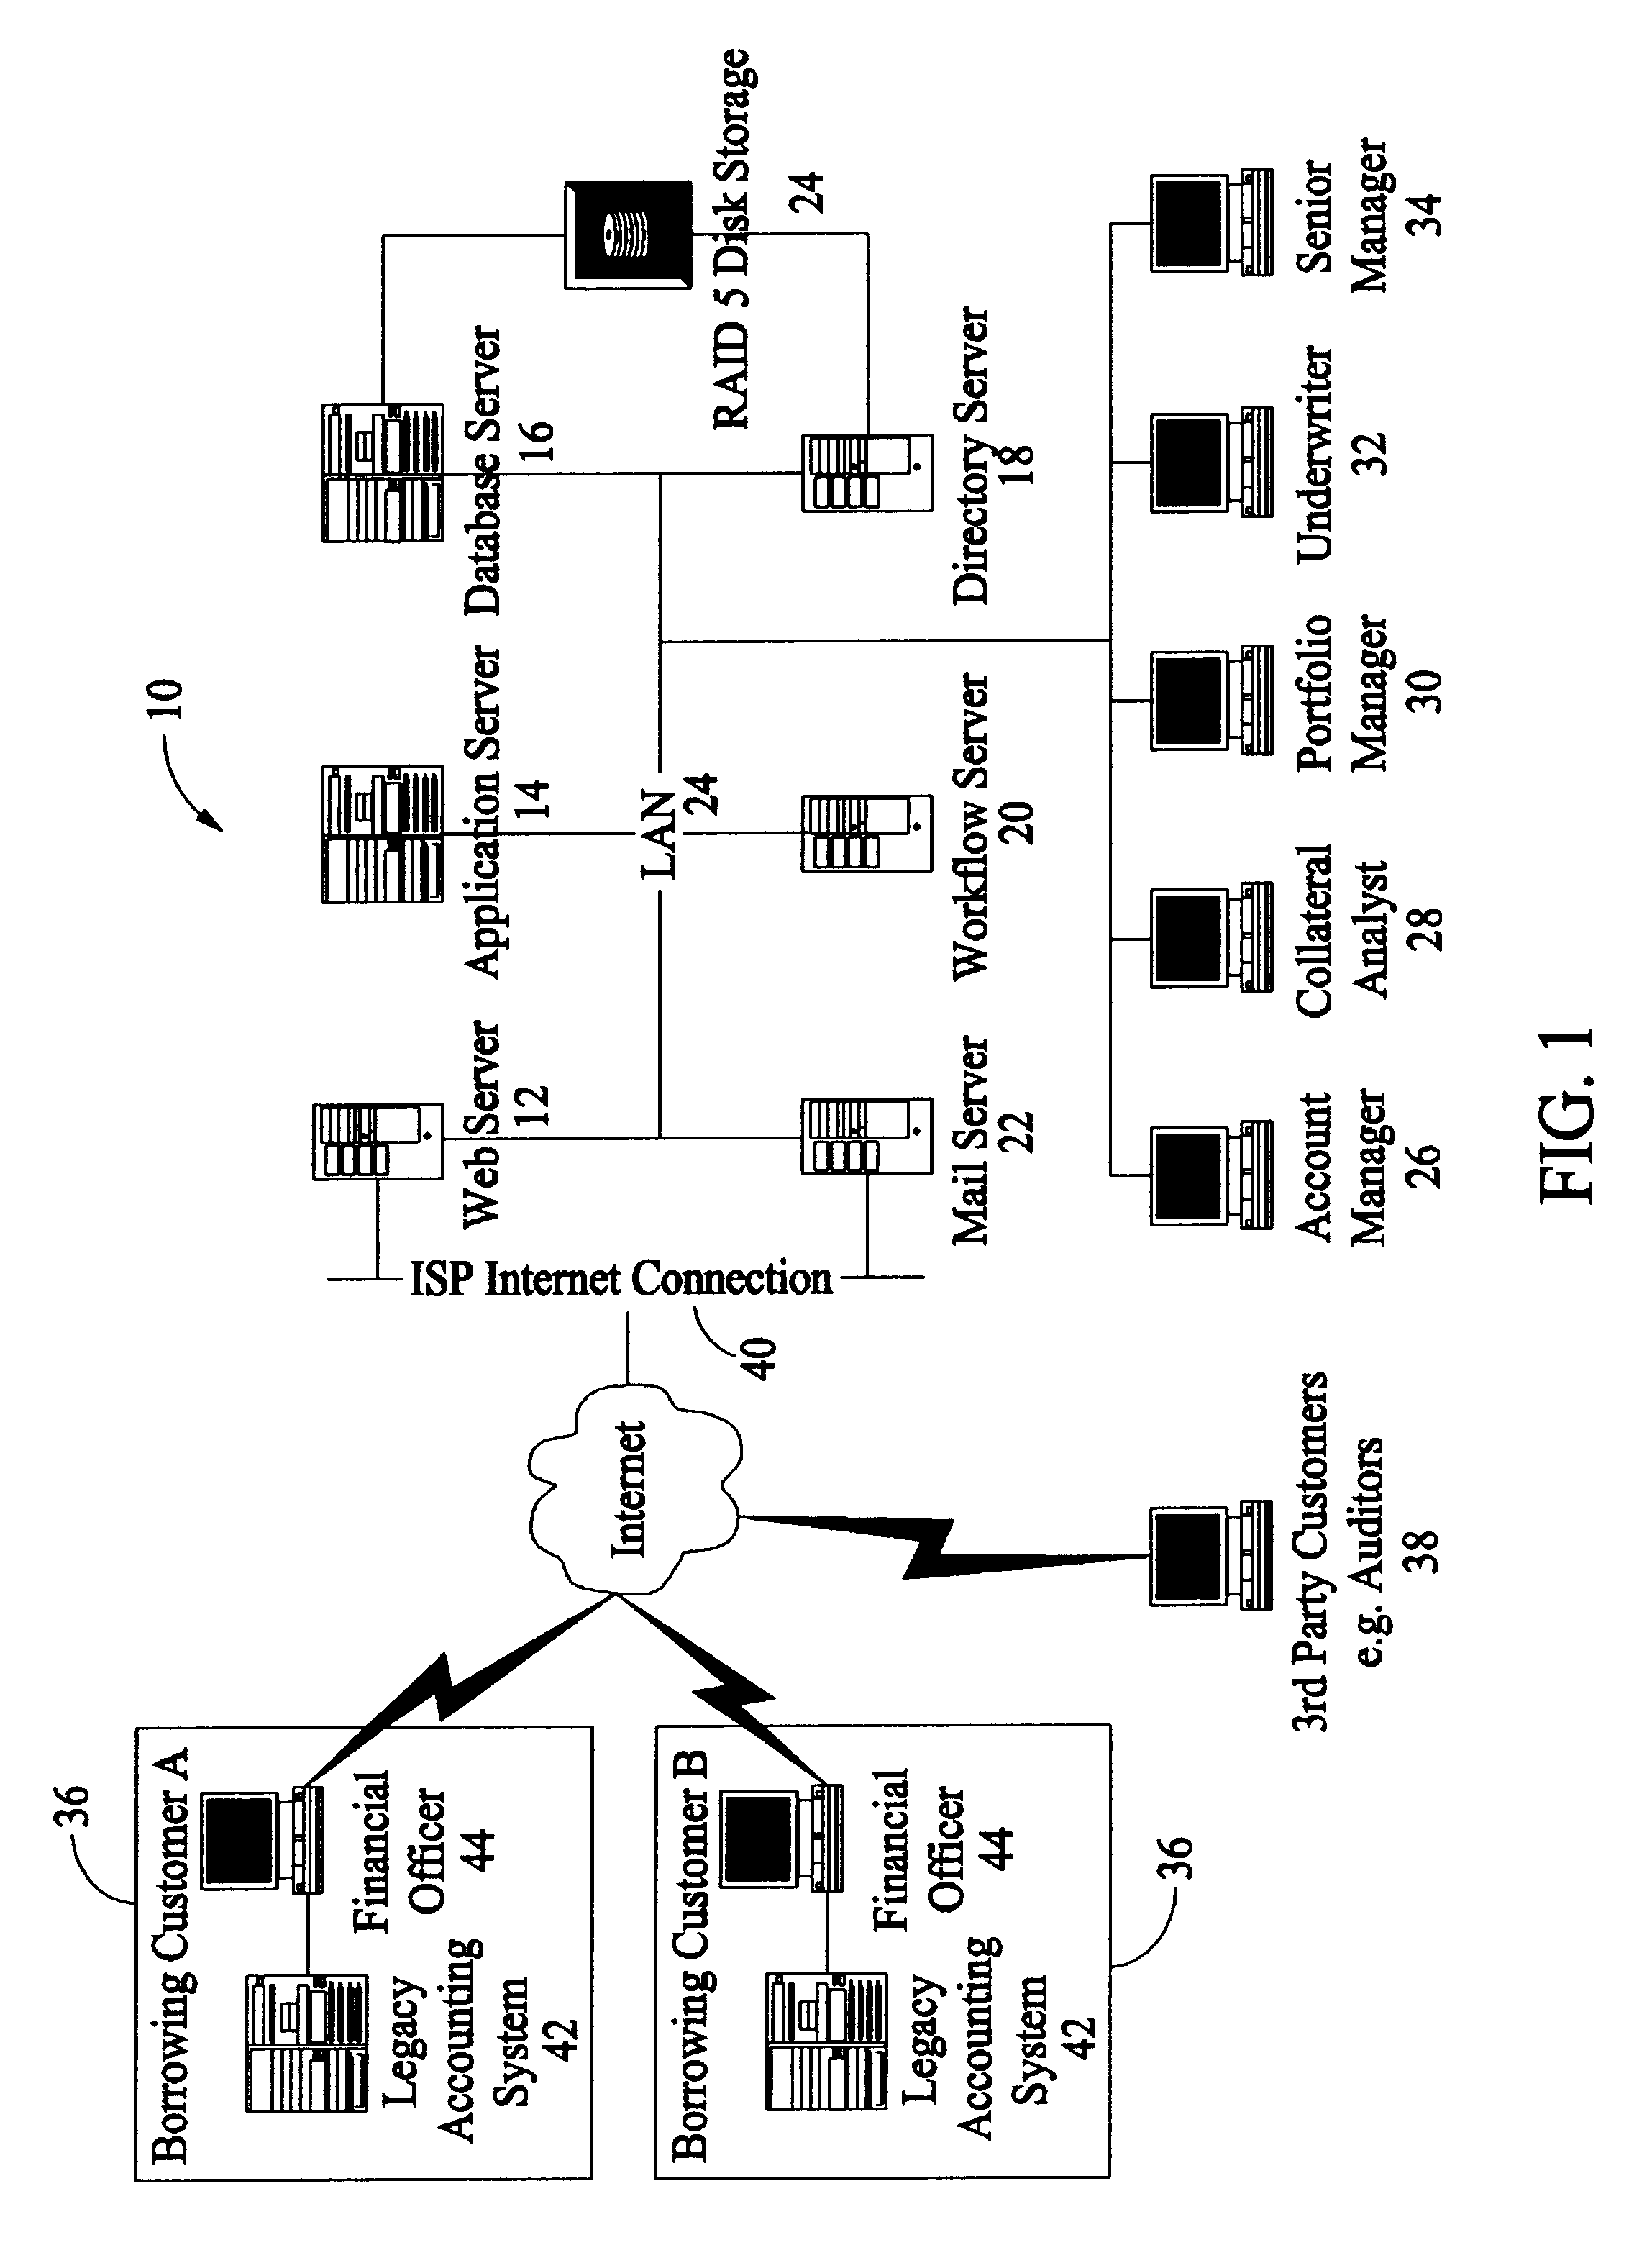 Methods and apparatus for collateral risk monitoring